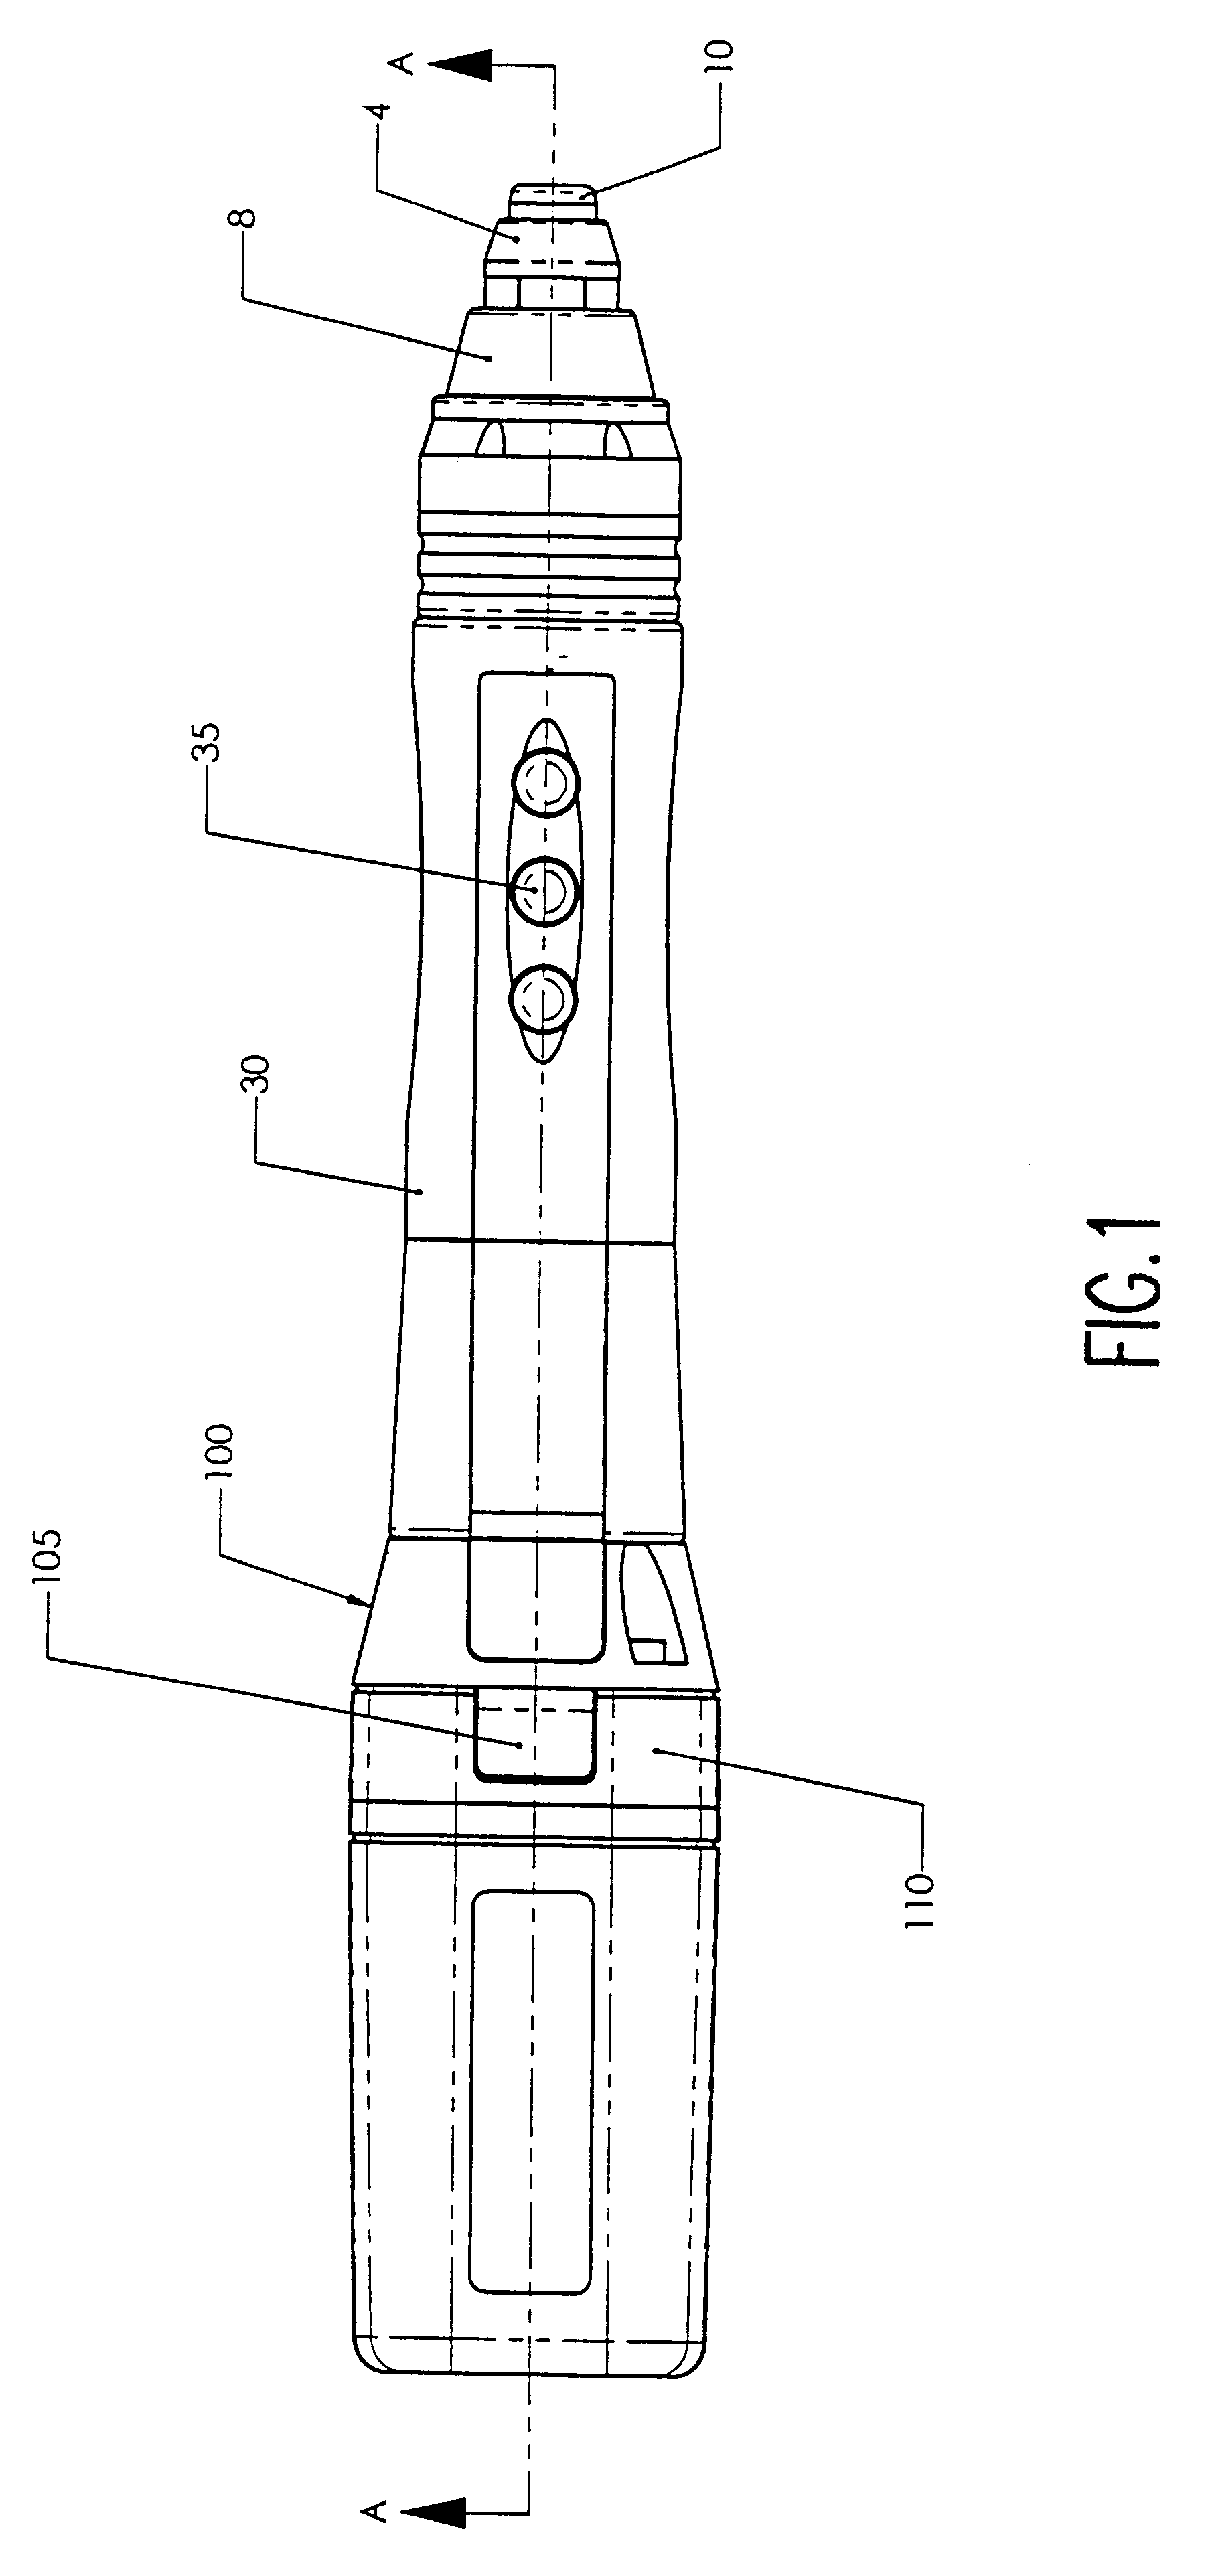 Powered surgical instrument having locking systems and a clutch mechanism